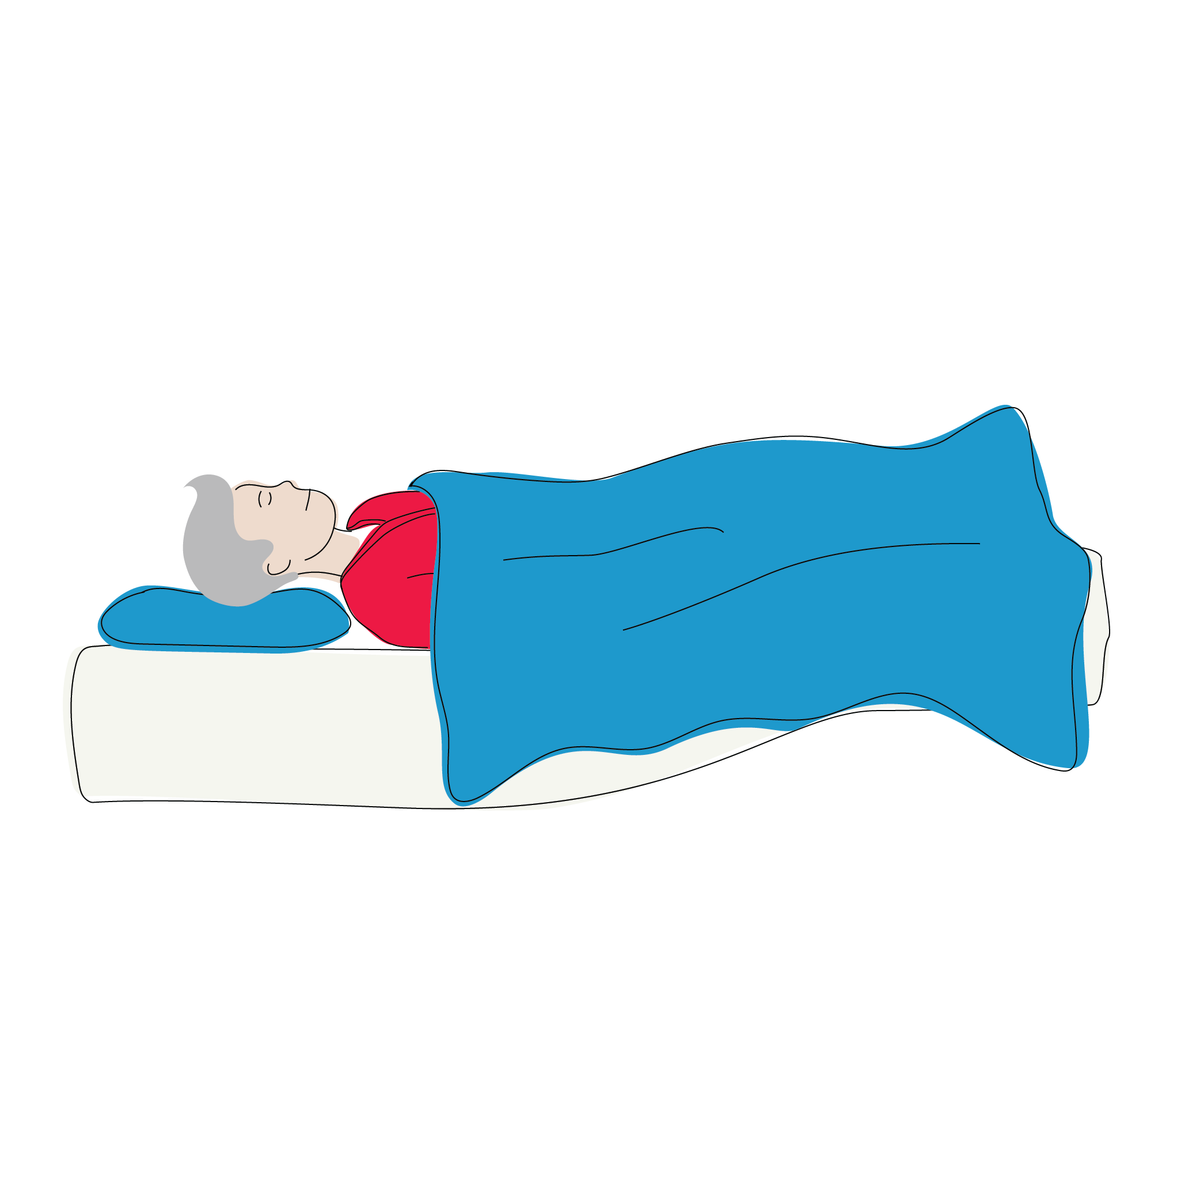 A graphic of a man sleeping with his legs raised